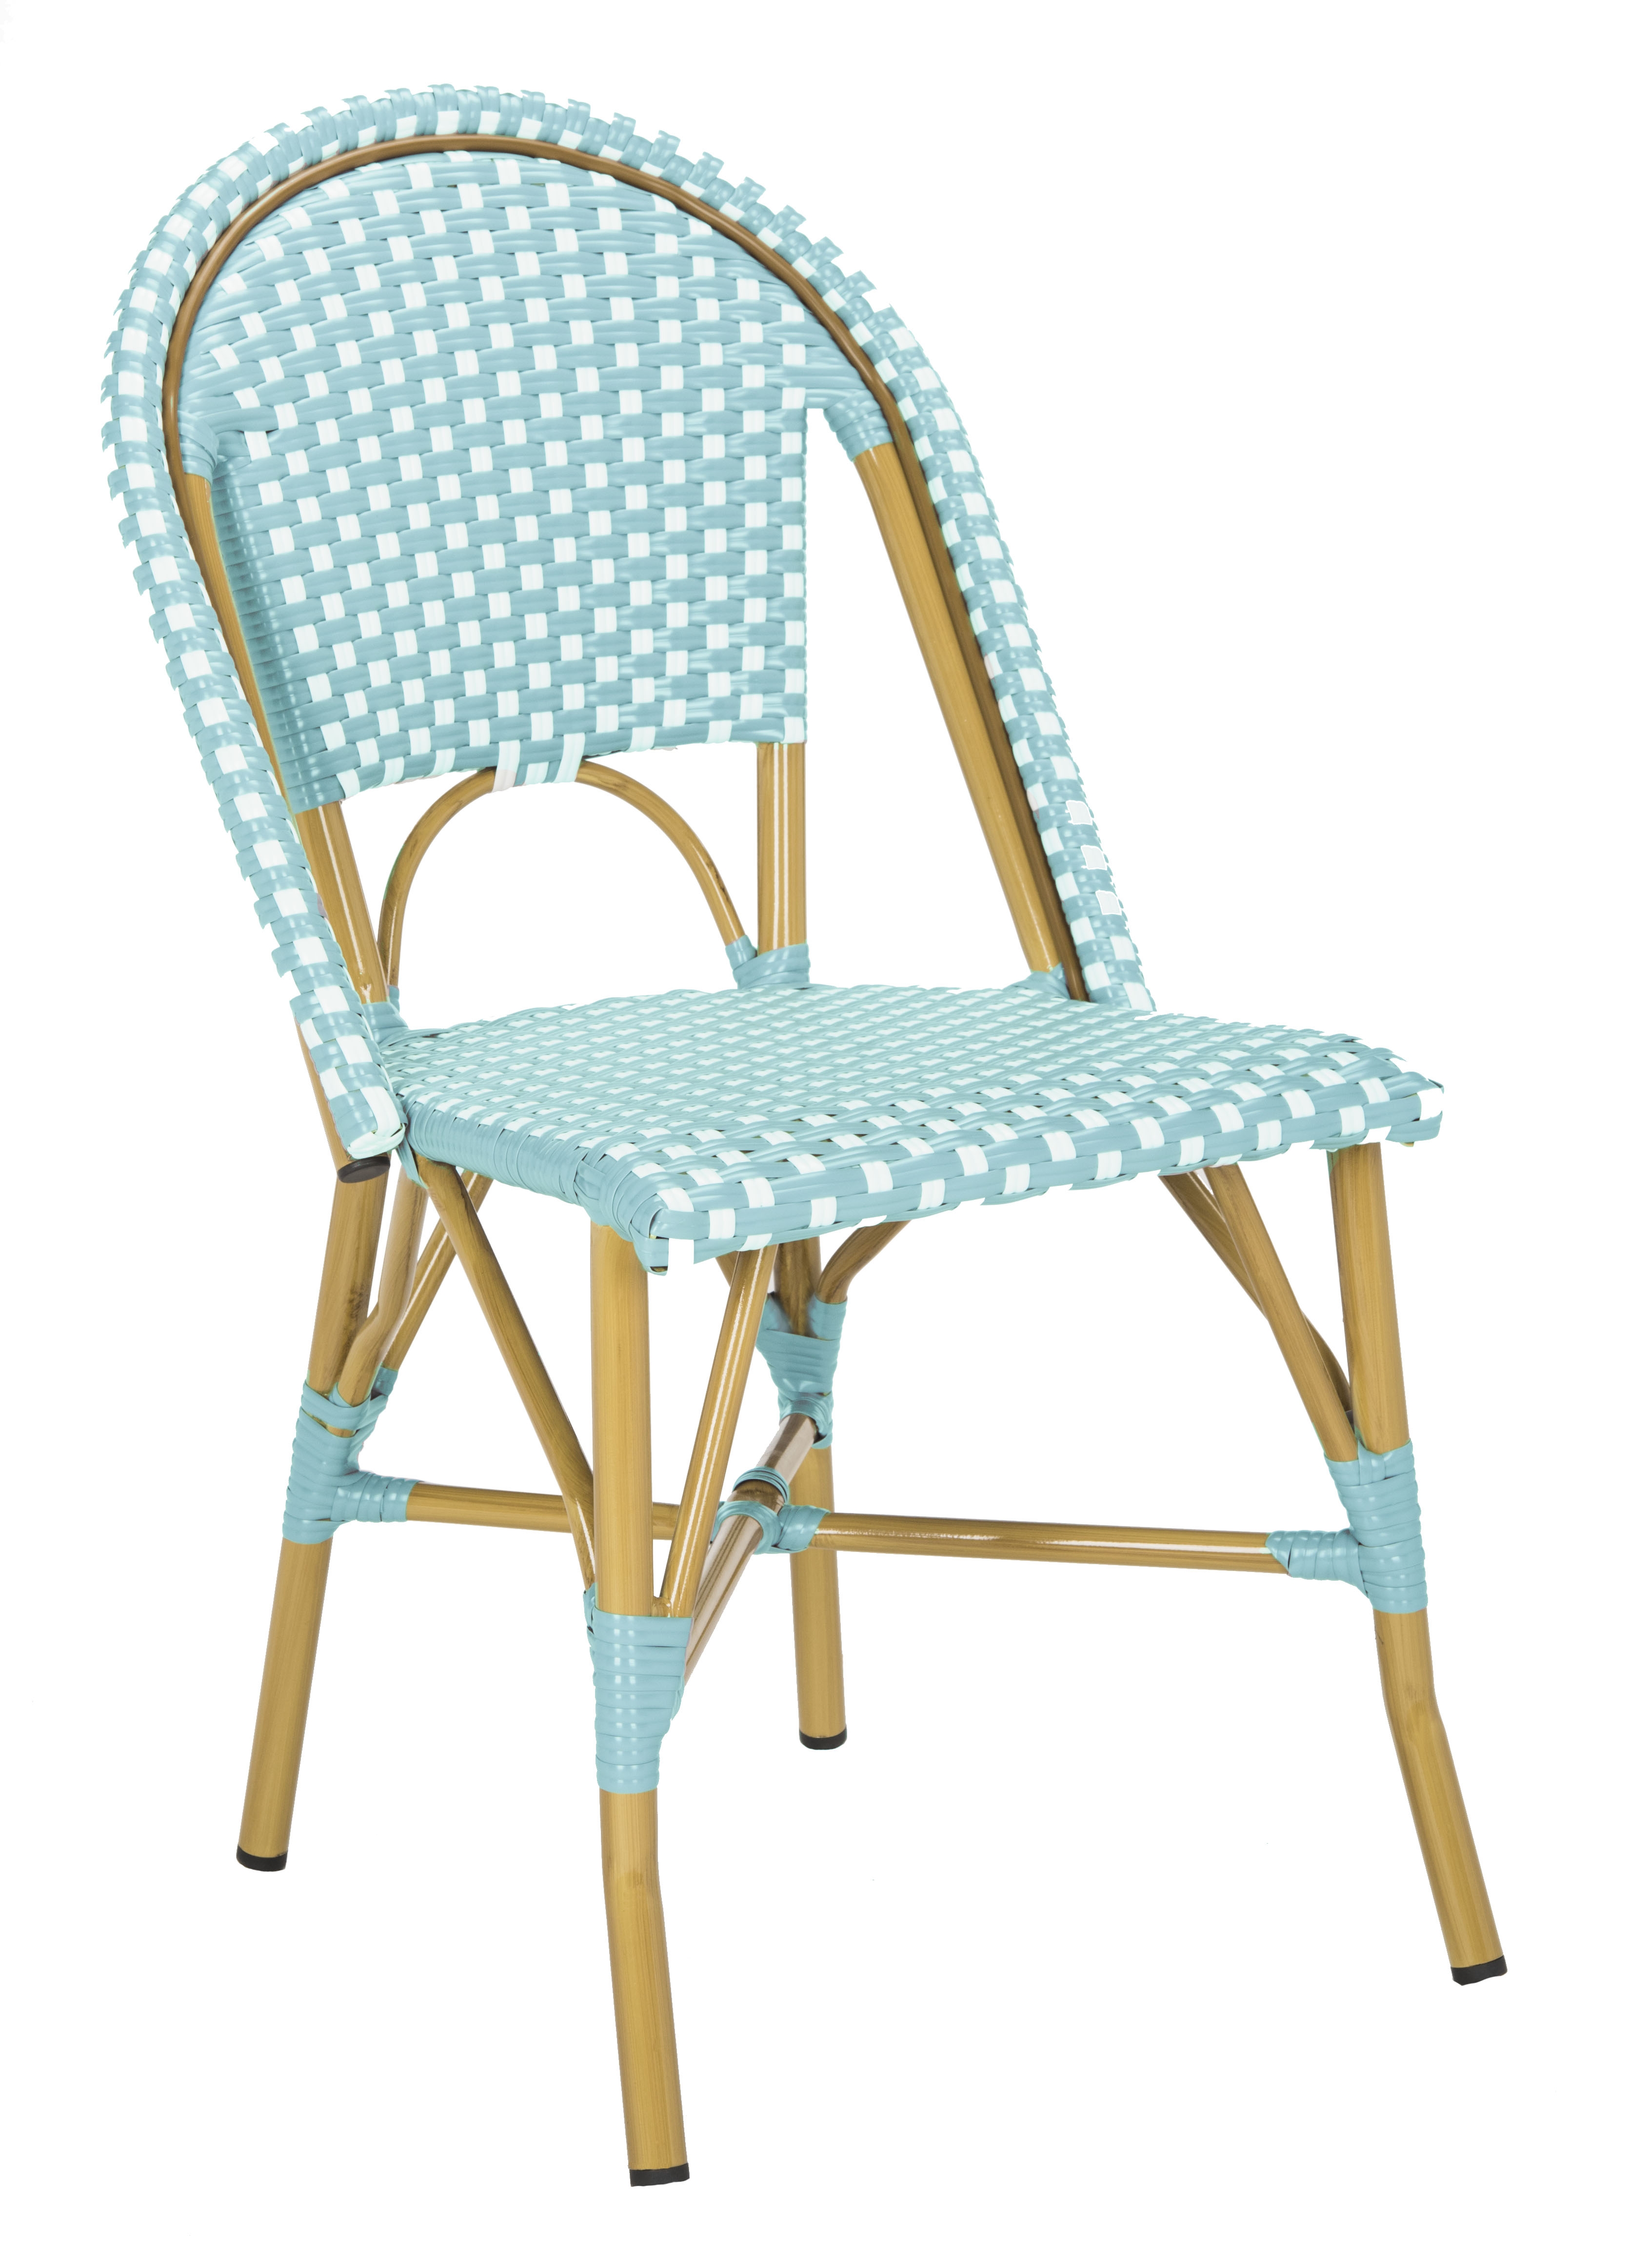 Salcha Indoor-Outdoor French Bistro Stacking Side Chair - Teal/White/Light Brown - Arlo Home - Image 2